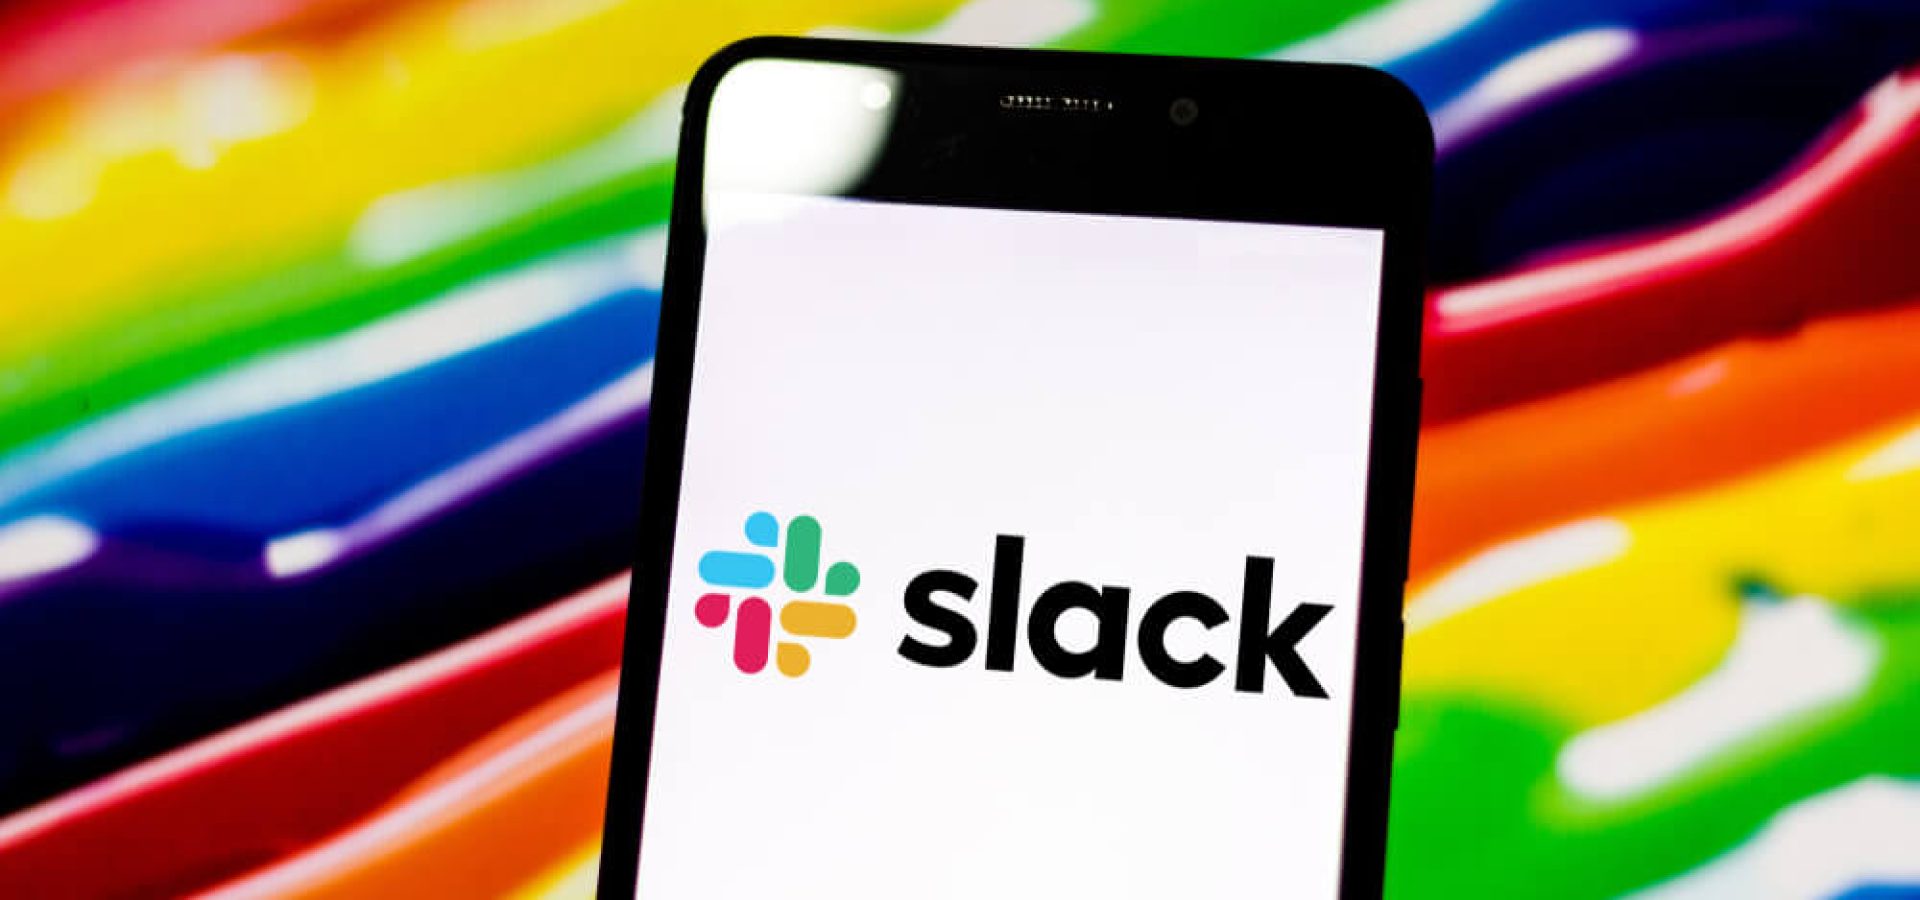 The Slack logo displayed on an Android phone.